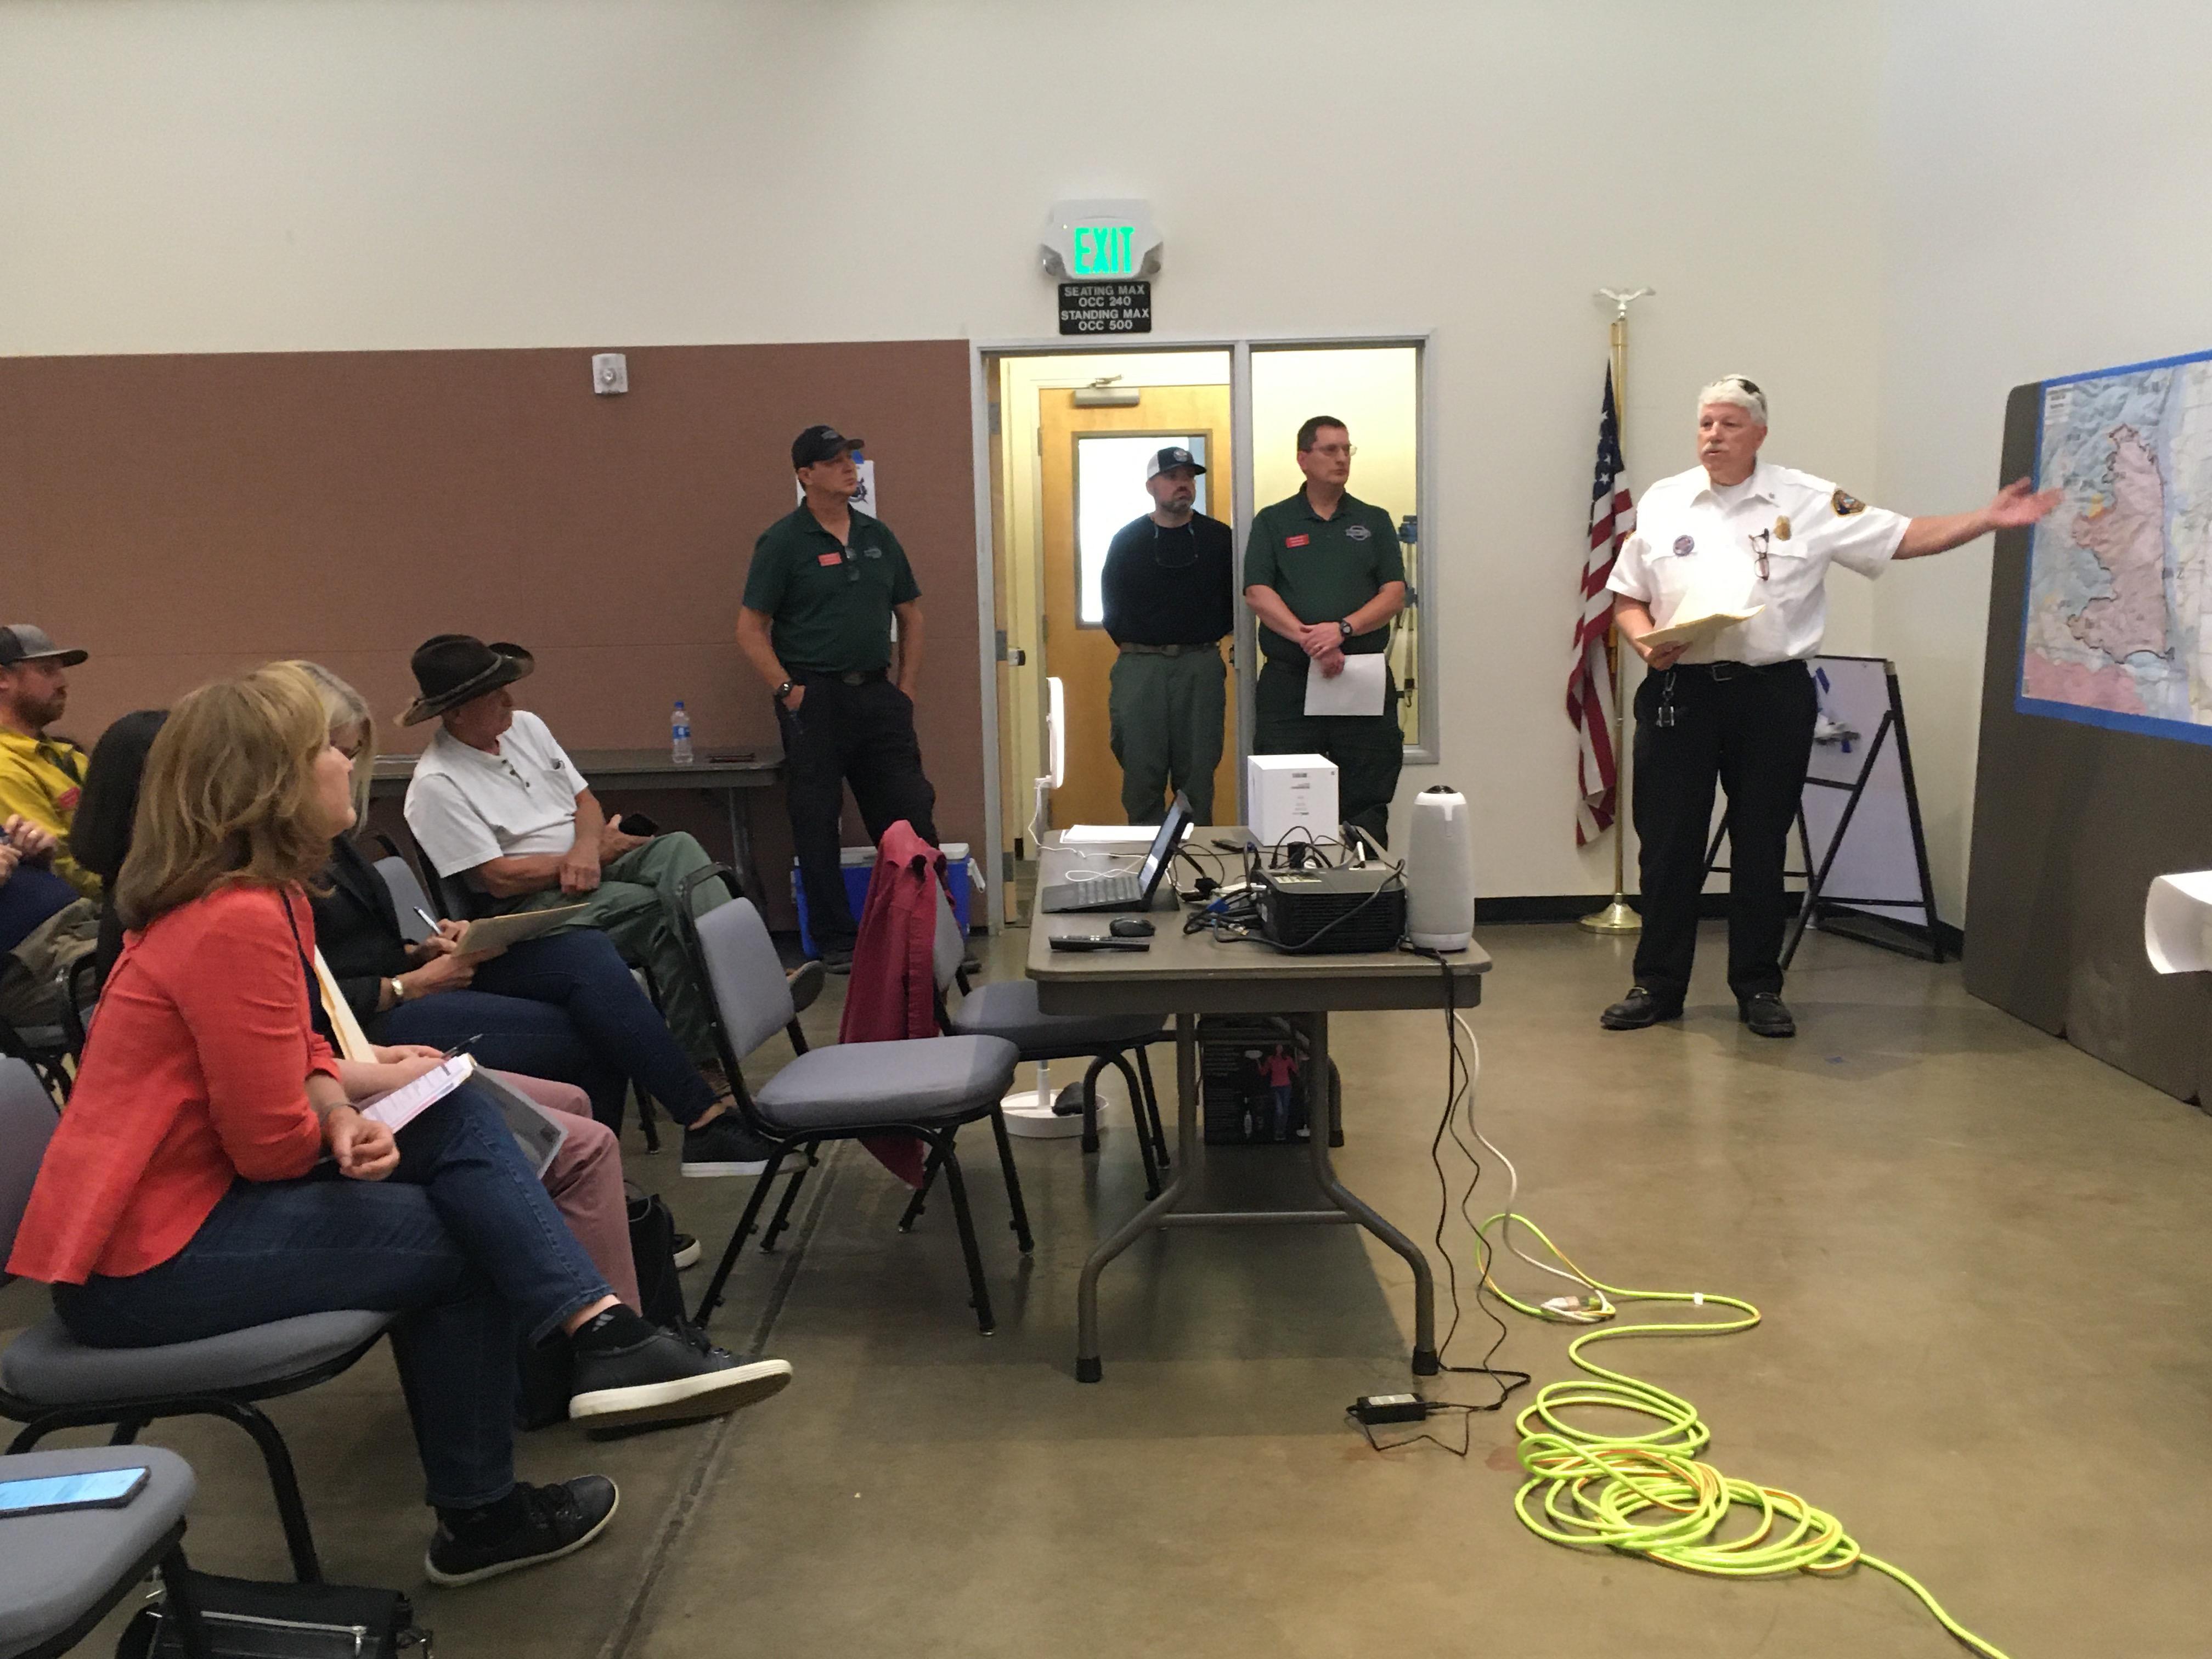 Kittitas Valley Fire and Rescue Chief Sinclair talks about working cooperatively with resources from state and federal agencies.